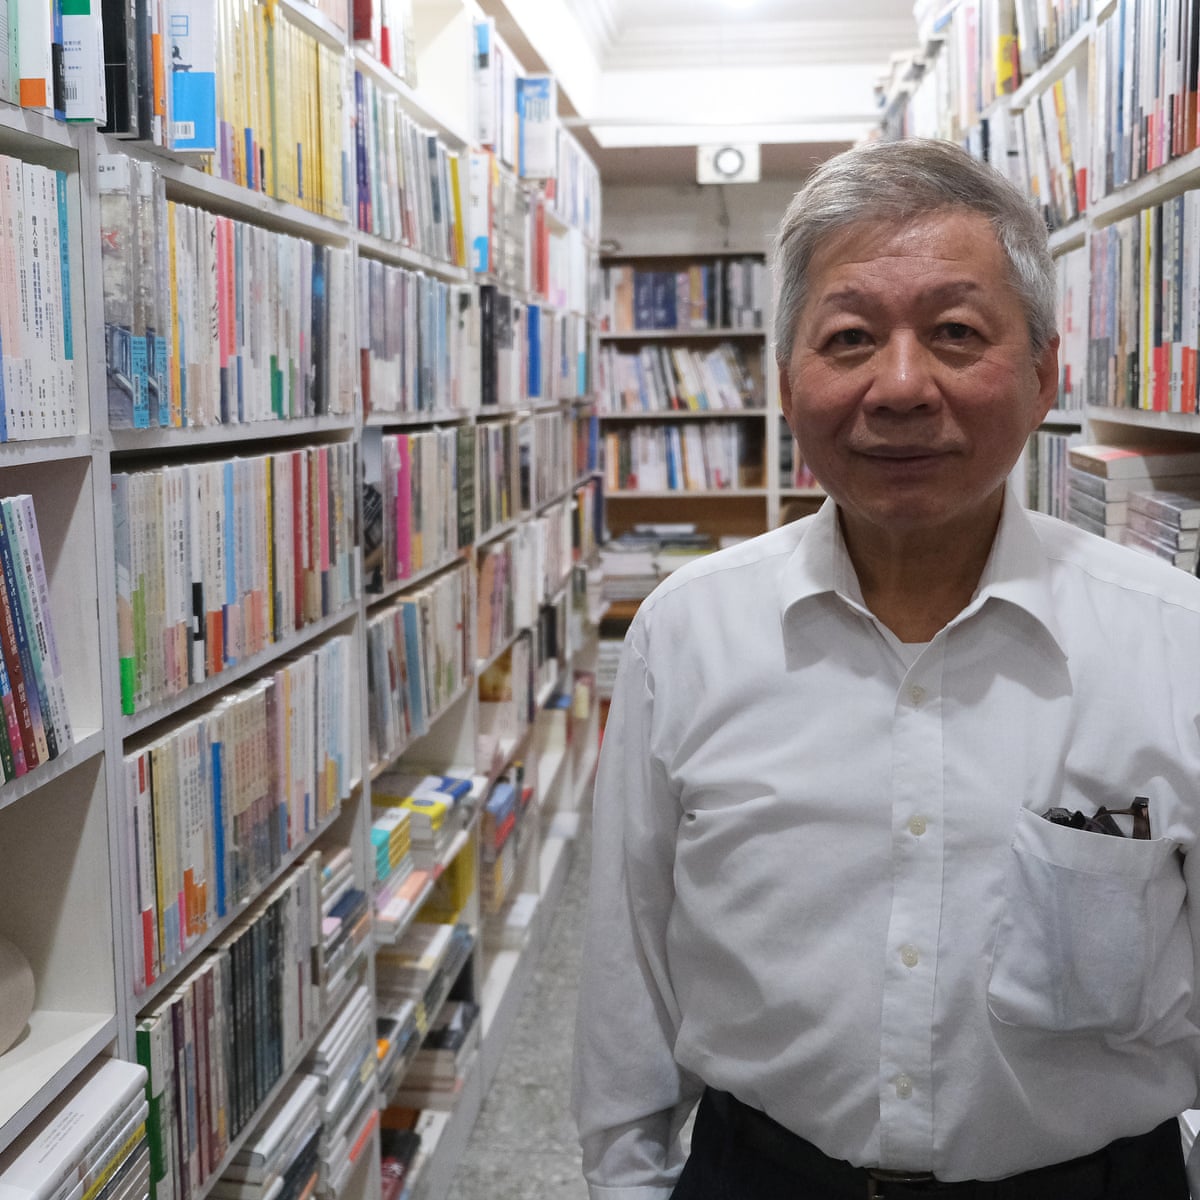 Publishing these books is a risk': Taiwan's booksellers stand up for  democracy, Taiwan